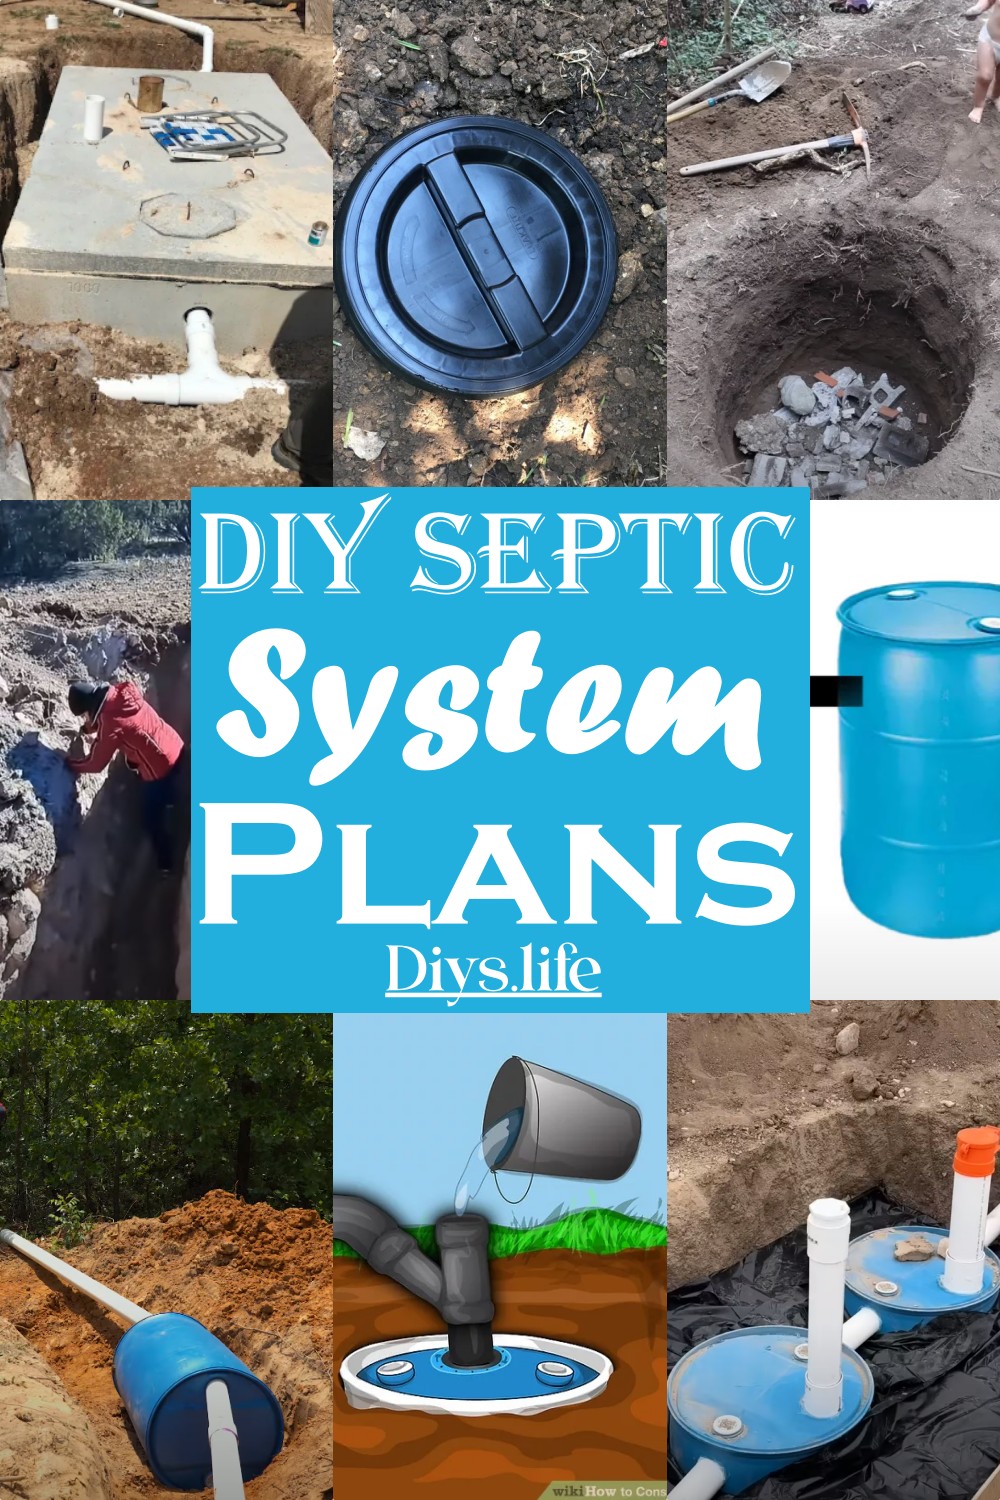 DIY Septic System for Waster Water